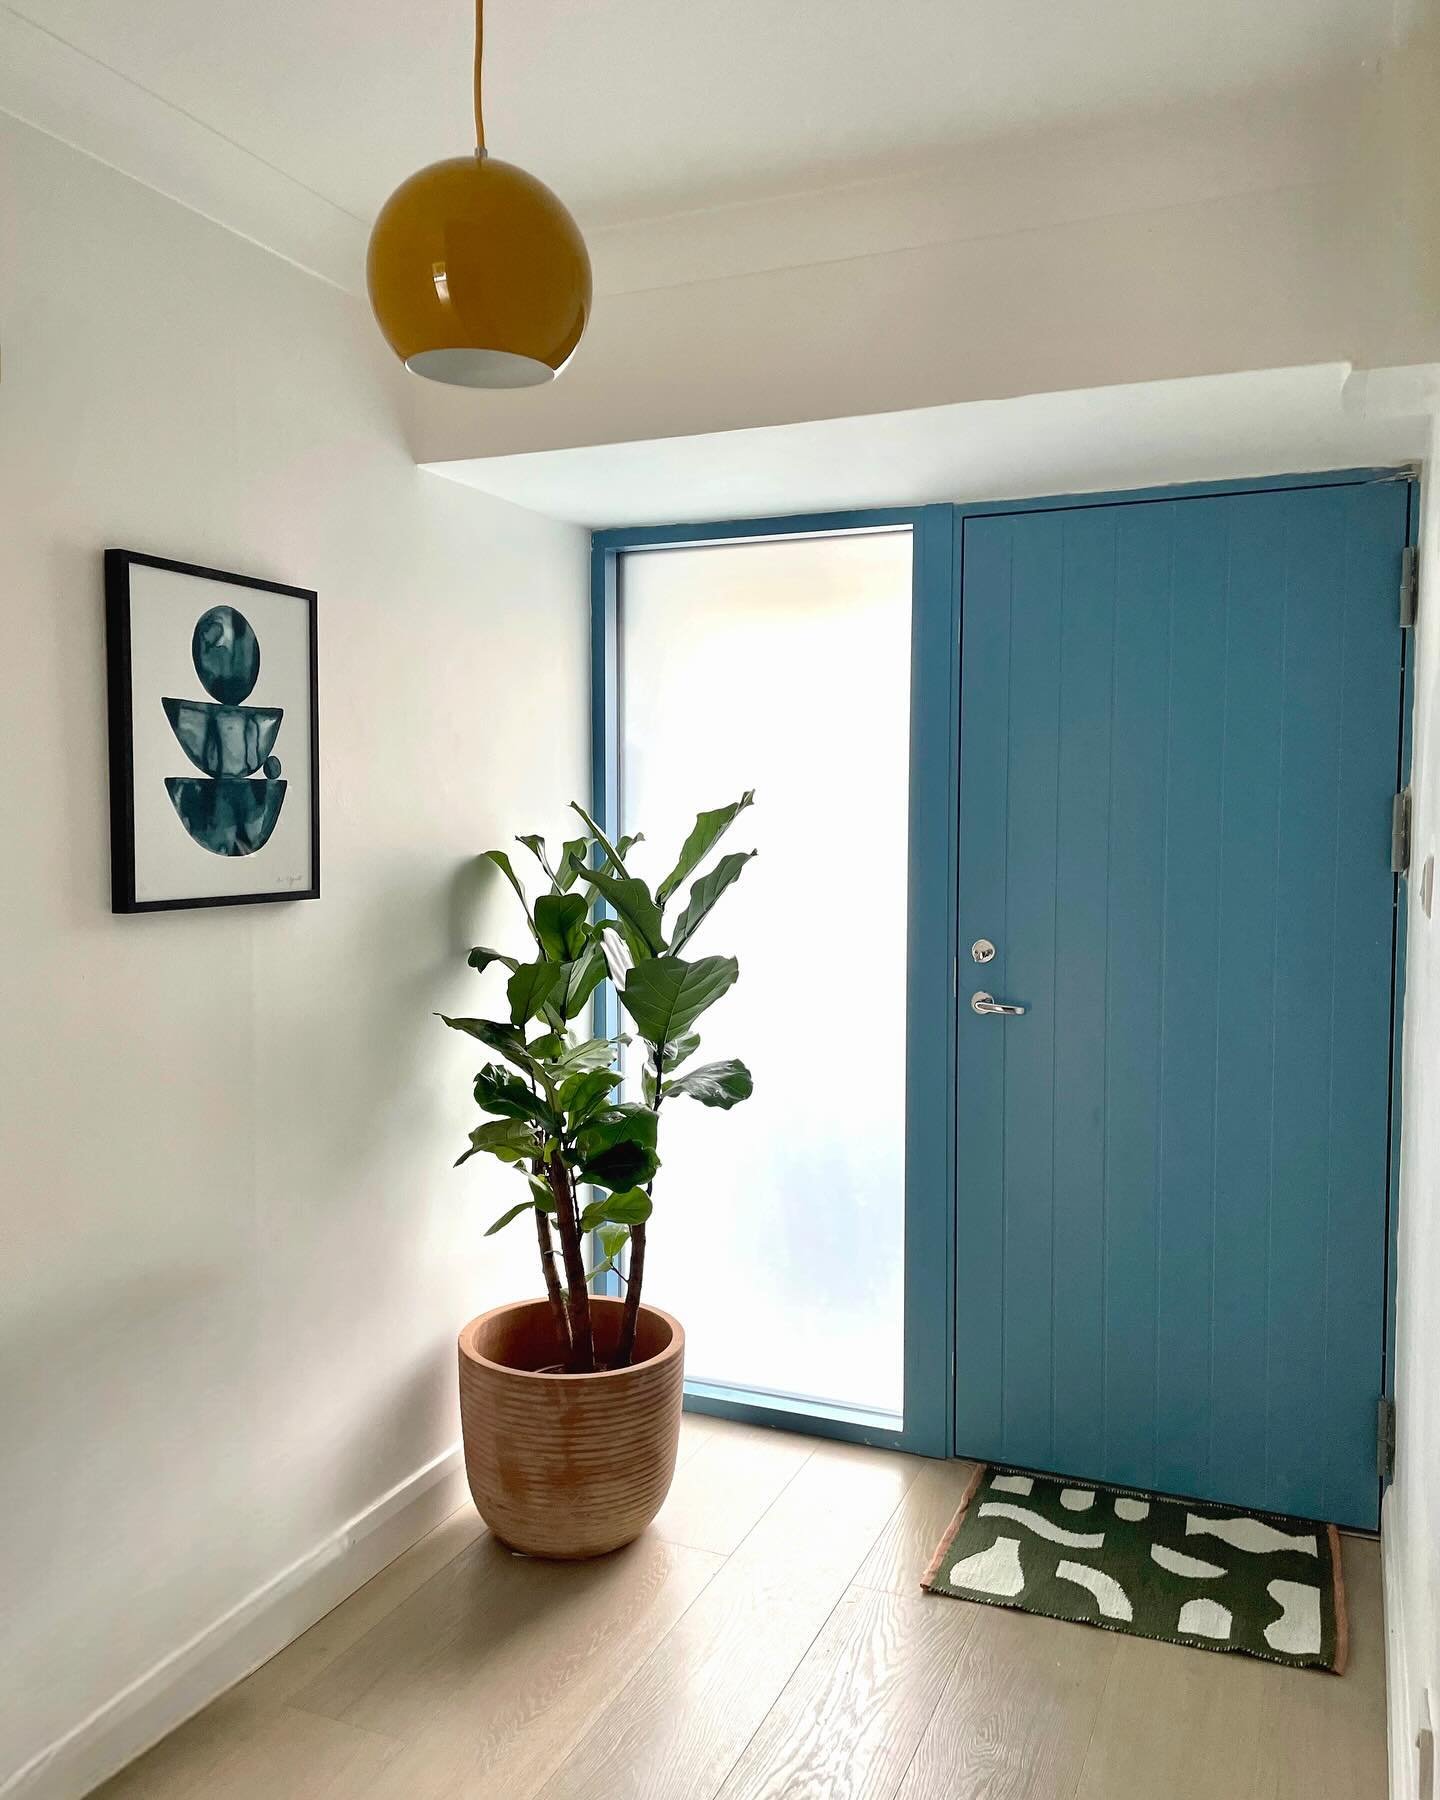 A look back to this hallway design for a client last year. I kept a bright, fresh and airy palette in mind when designing this small space. Neutral walls allowed for more colourful choices elsewhere. Love a brightly coloured front door. Swipe for the